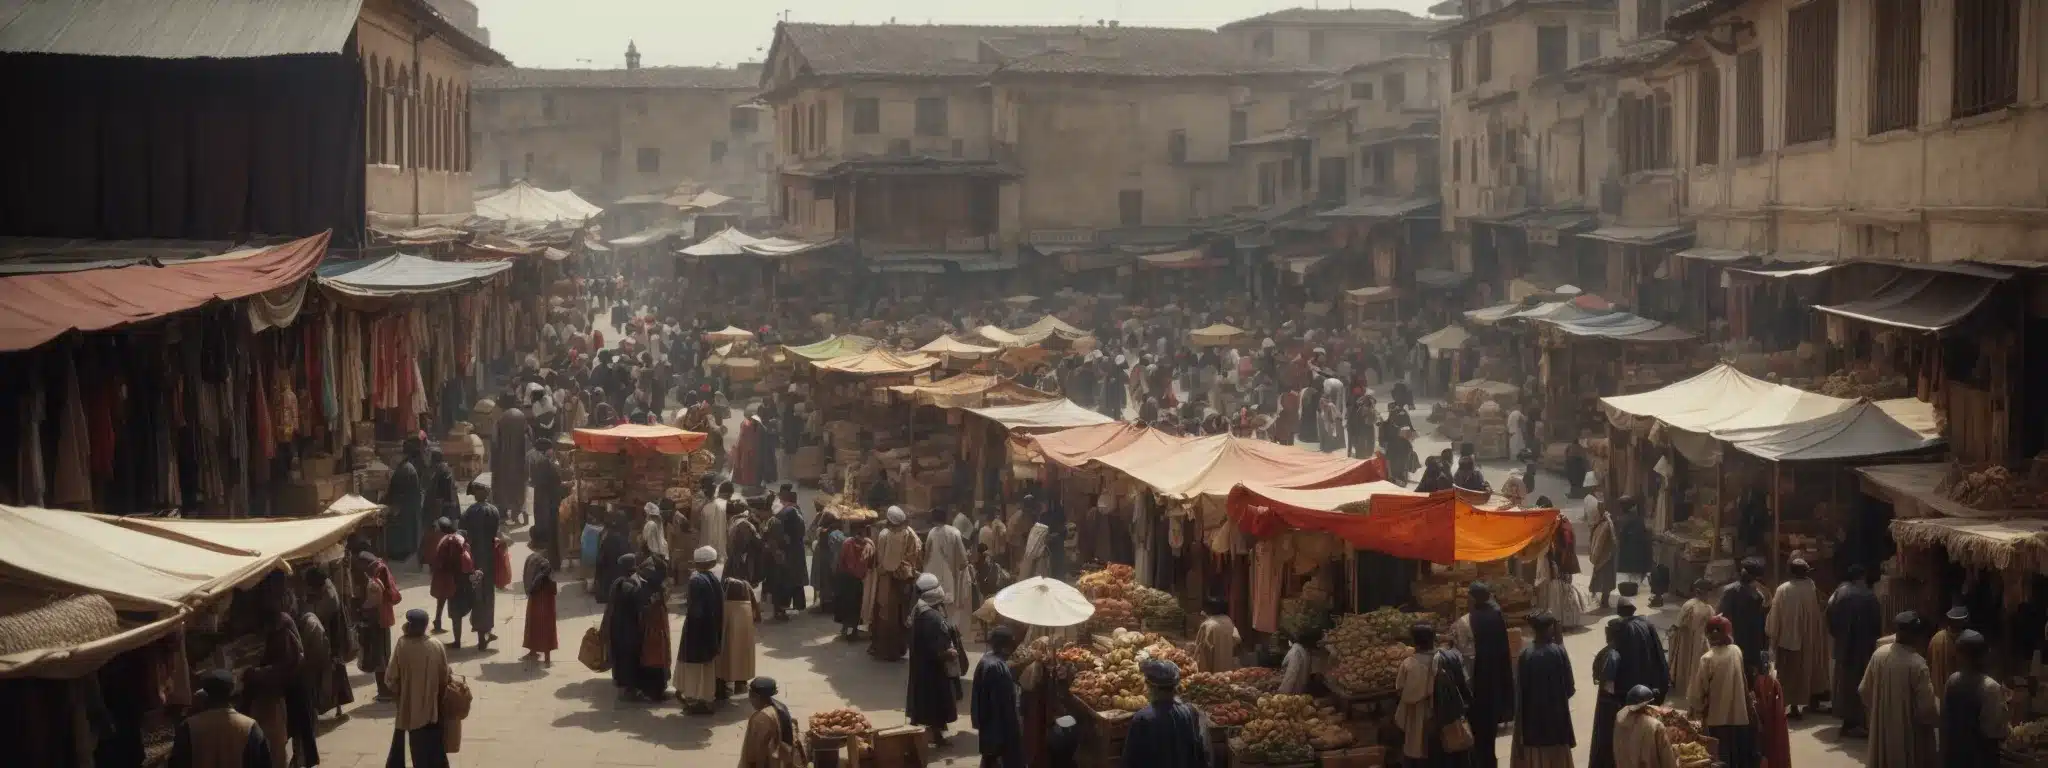 A Bustling Marketplace Scene With Diverse Groups Of People Exploring Different Stalls.